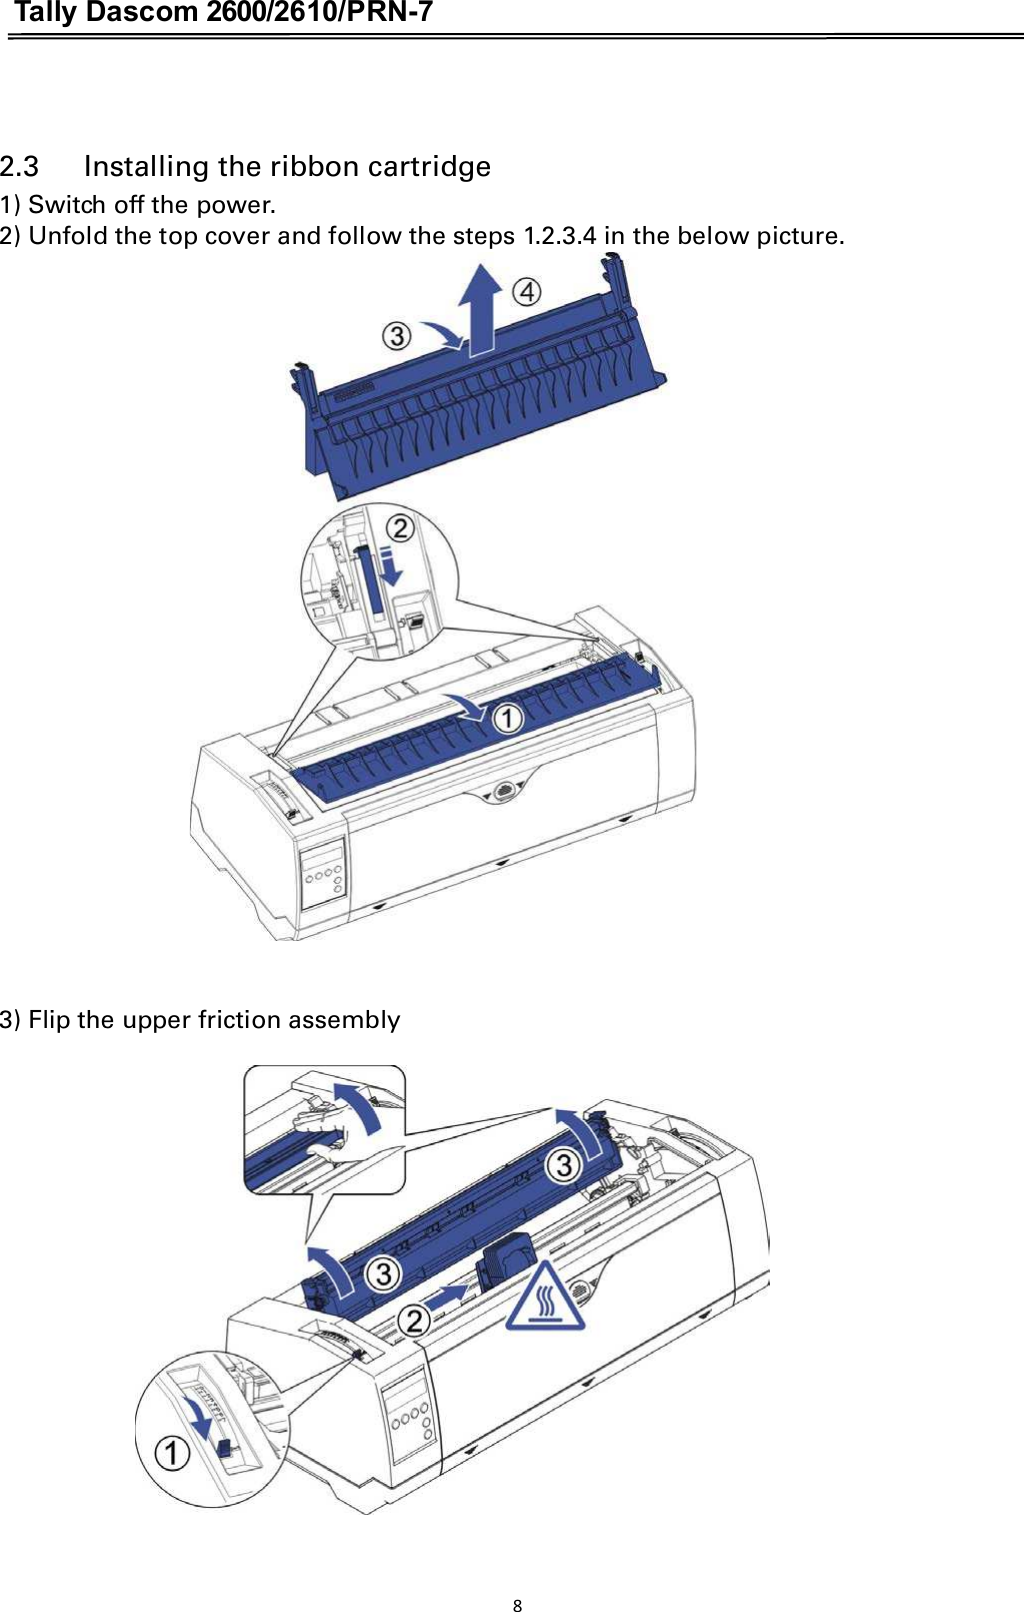 Tally Dascom 2600/2610/PRN-7   2.3      Installing the ribbon cartridge 1) Switch off the power. 2) Unfold the top cover and follow the steps 1.2.3.4 in the below picture.   3) Flip the upper friction assembly   8  